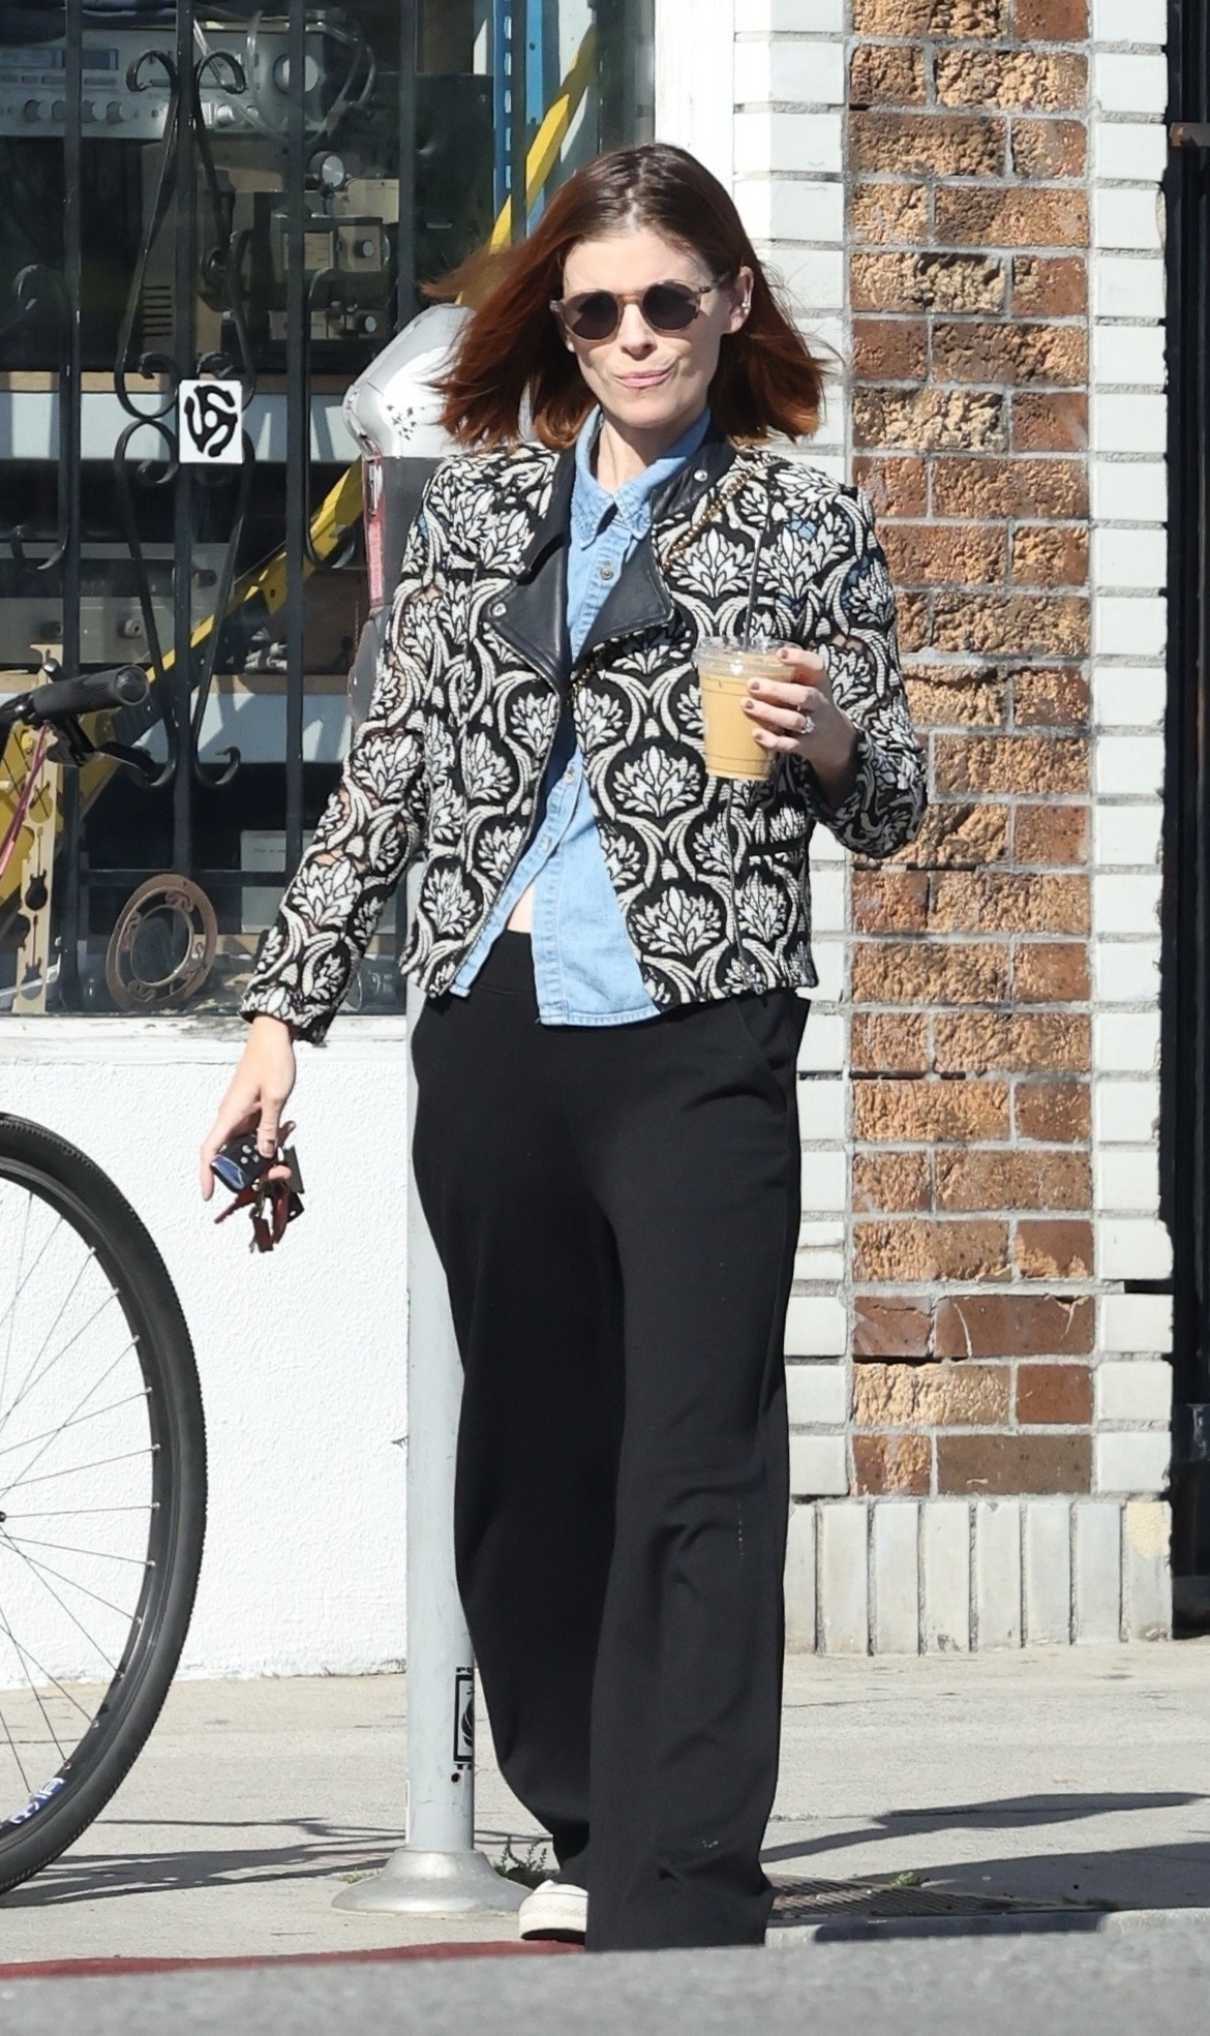 Kate Mara in a Patterned Floral Jacket